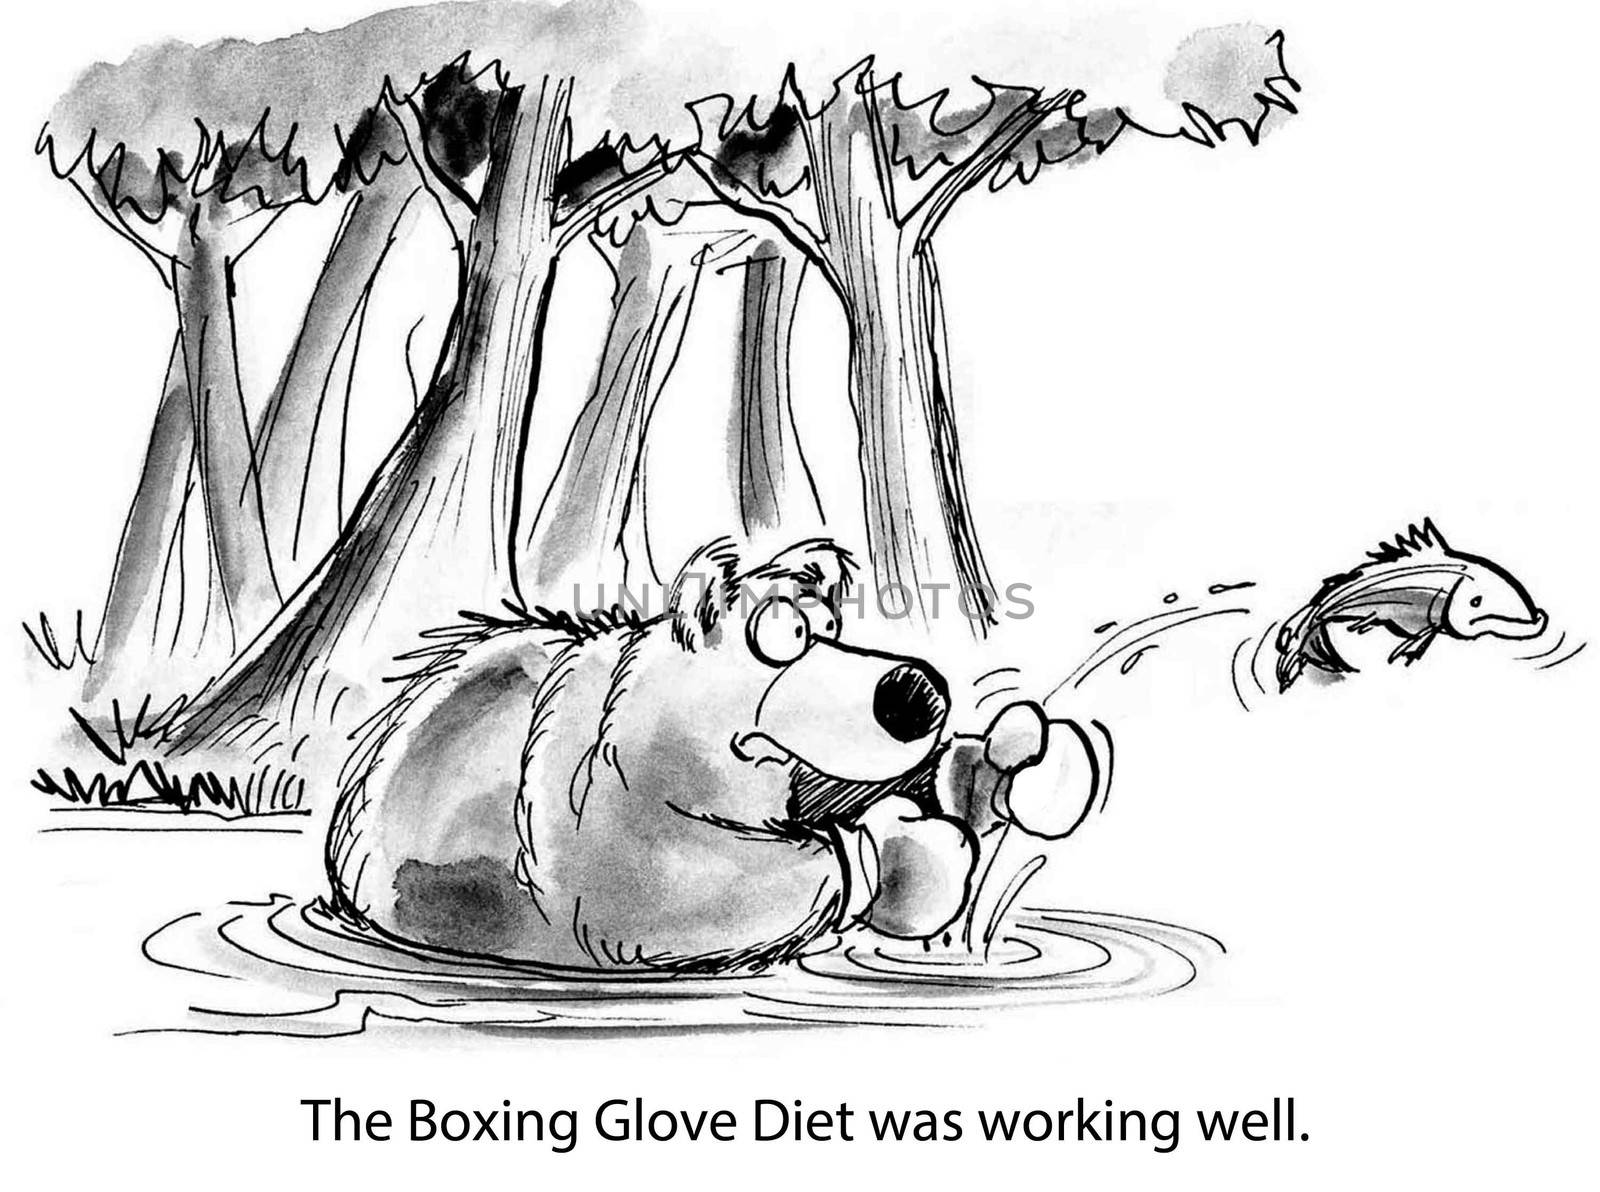 The Boxing Glove Diet was working well for him.